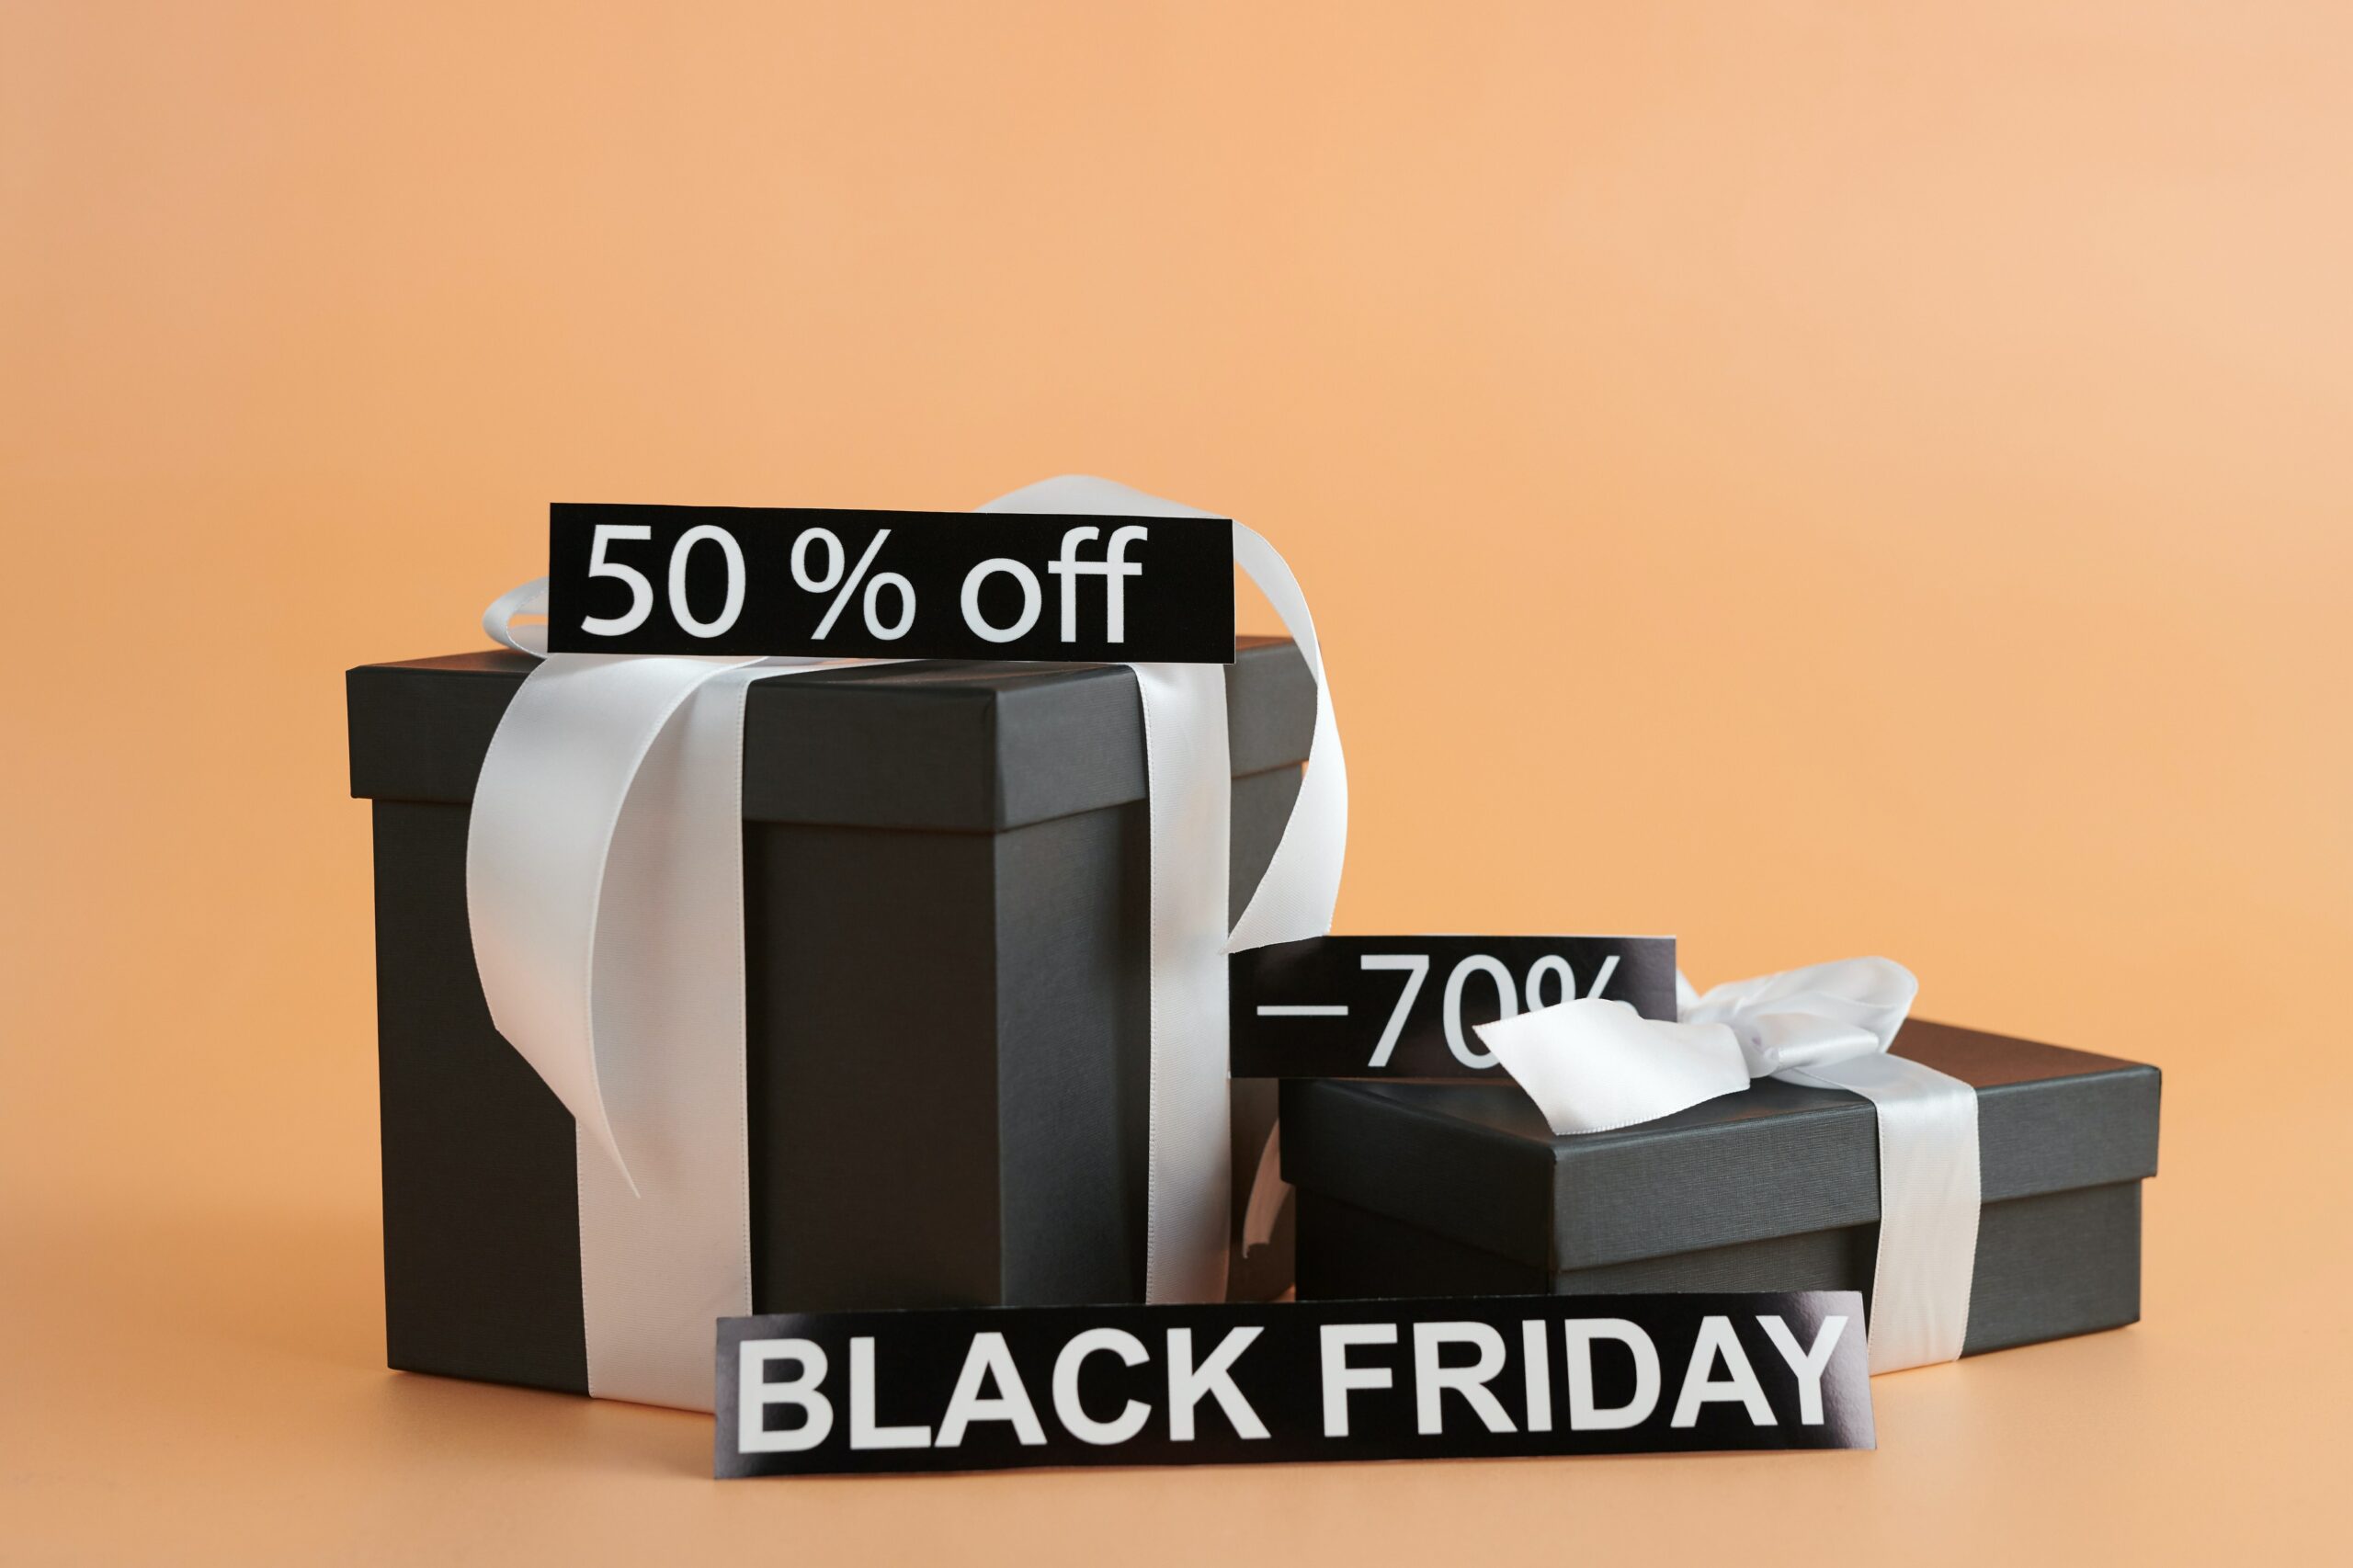 2022 Christmas and Black Friday advertising trends for ecommerce brands 